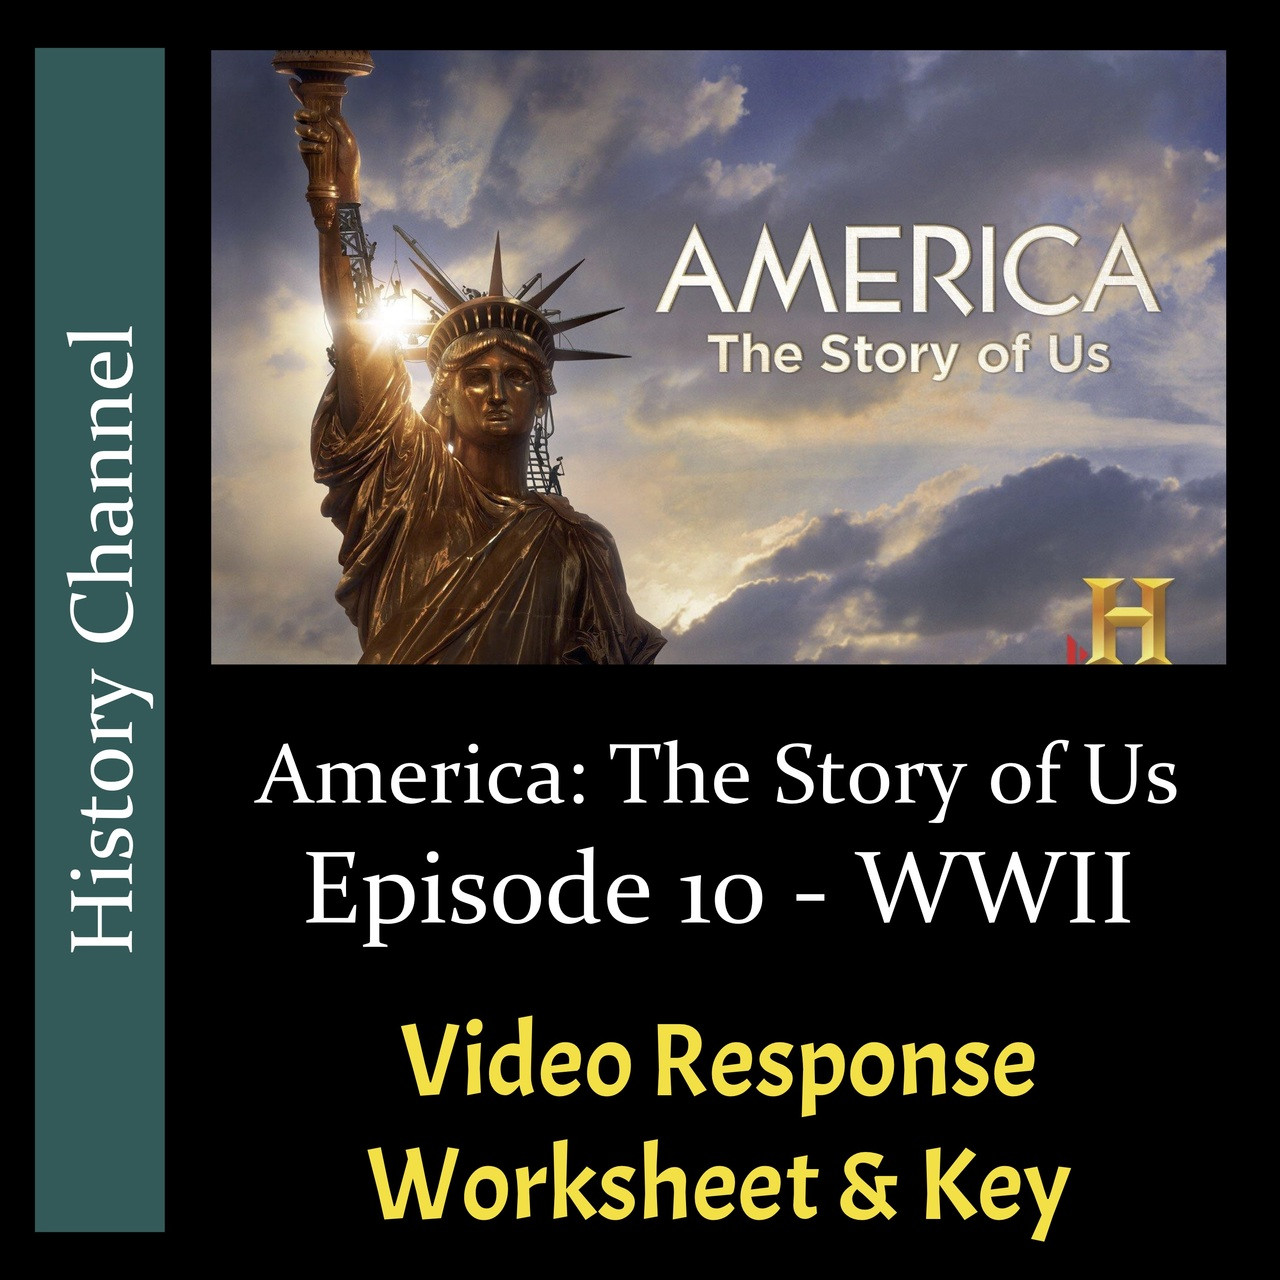 america-the-story-of-us-episode-10-wwii-video-response-worksheet-key-editable-amped